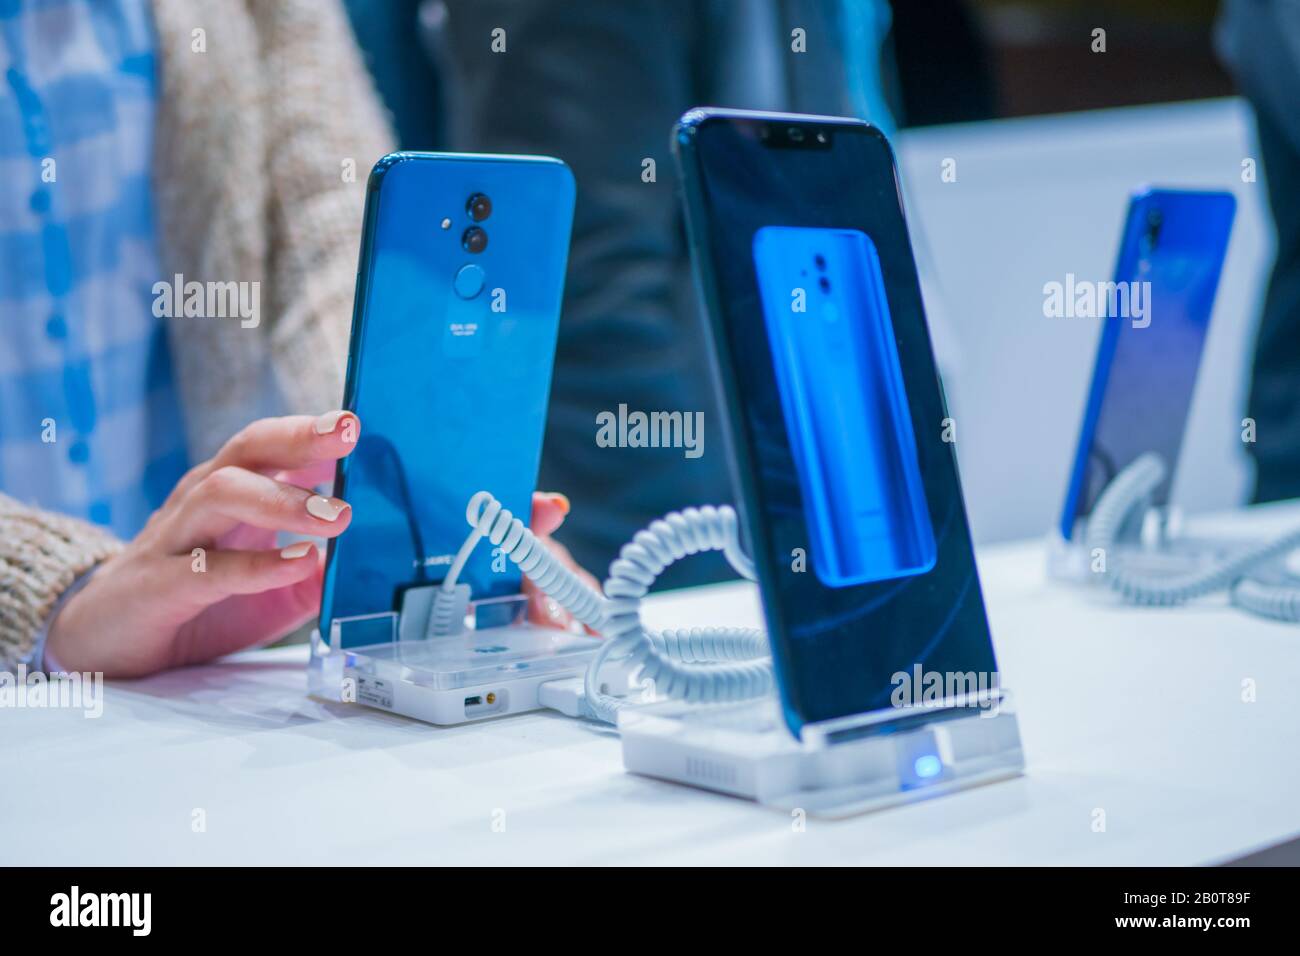 New Models Of Huawei Smartphone In Electronic Shop Stock Photo Alamy